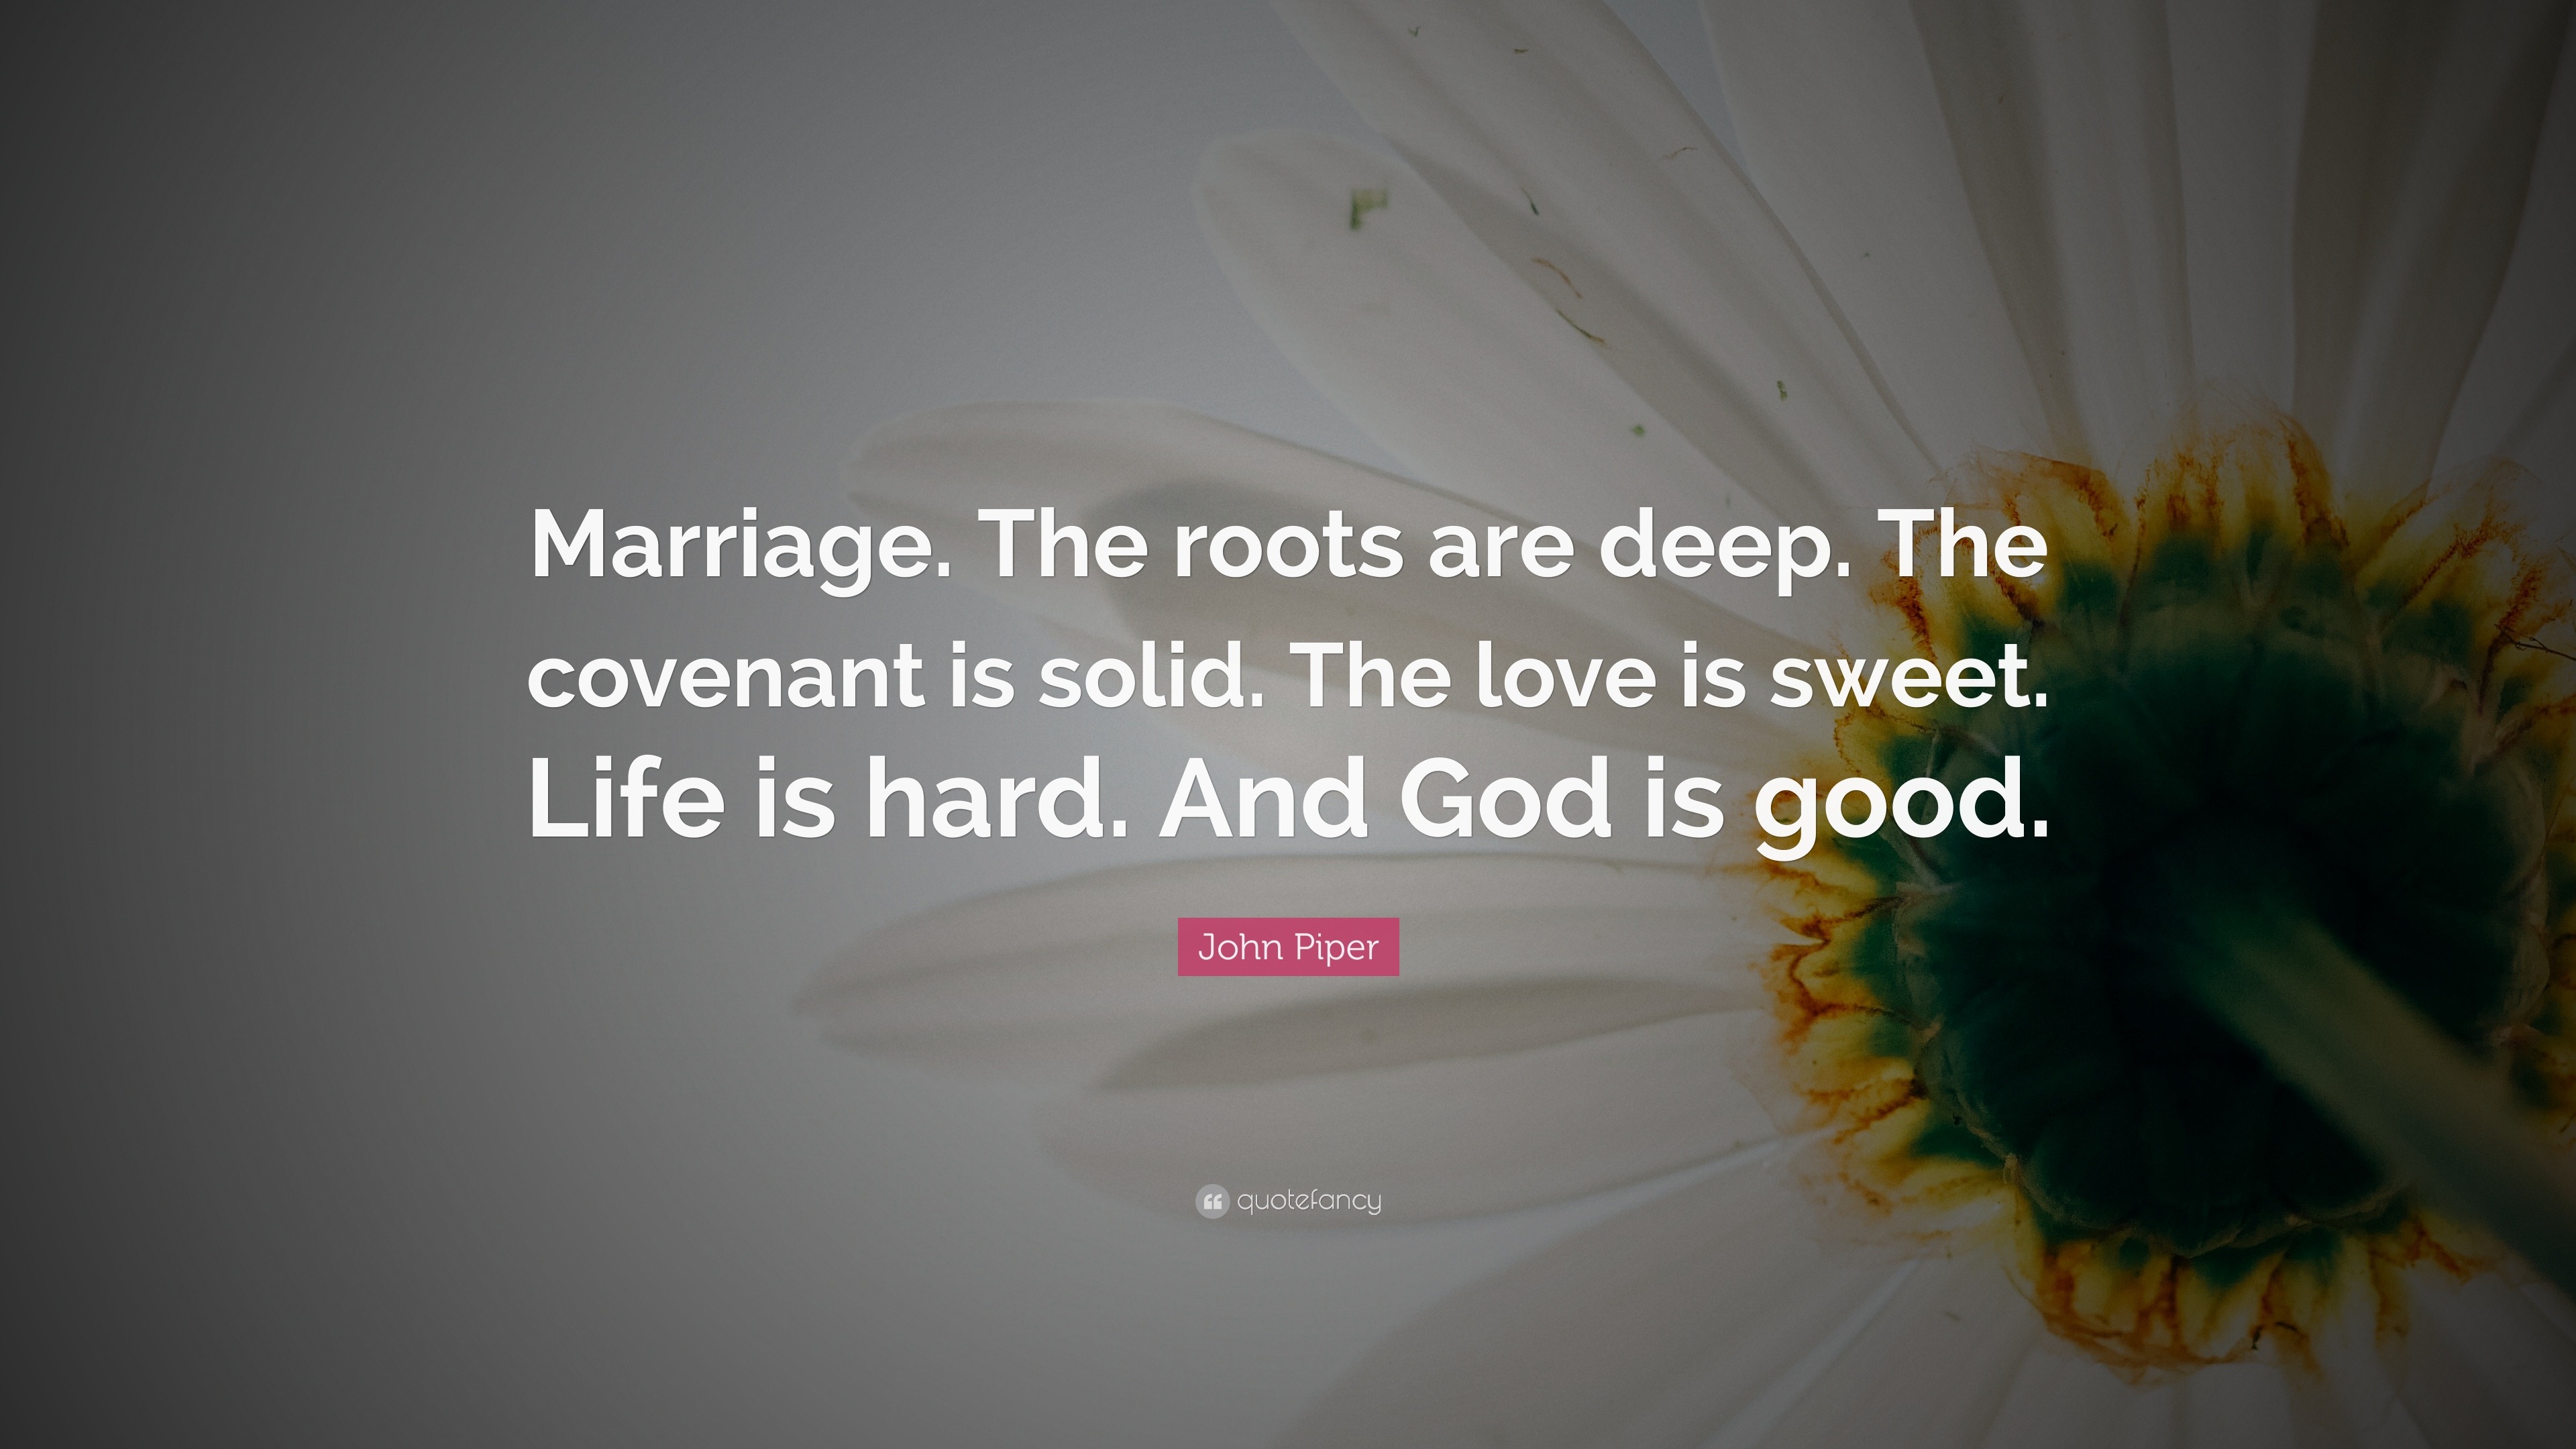 John Piper Quote “Marriage The roots are deep The covenant is solid